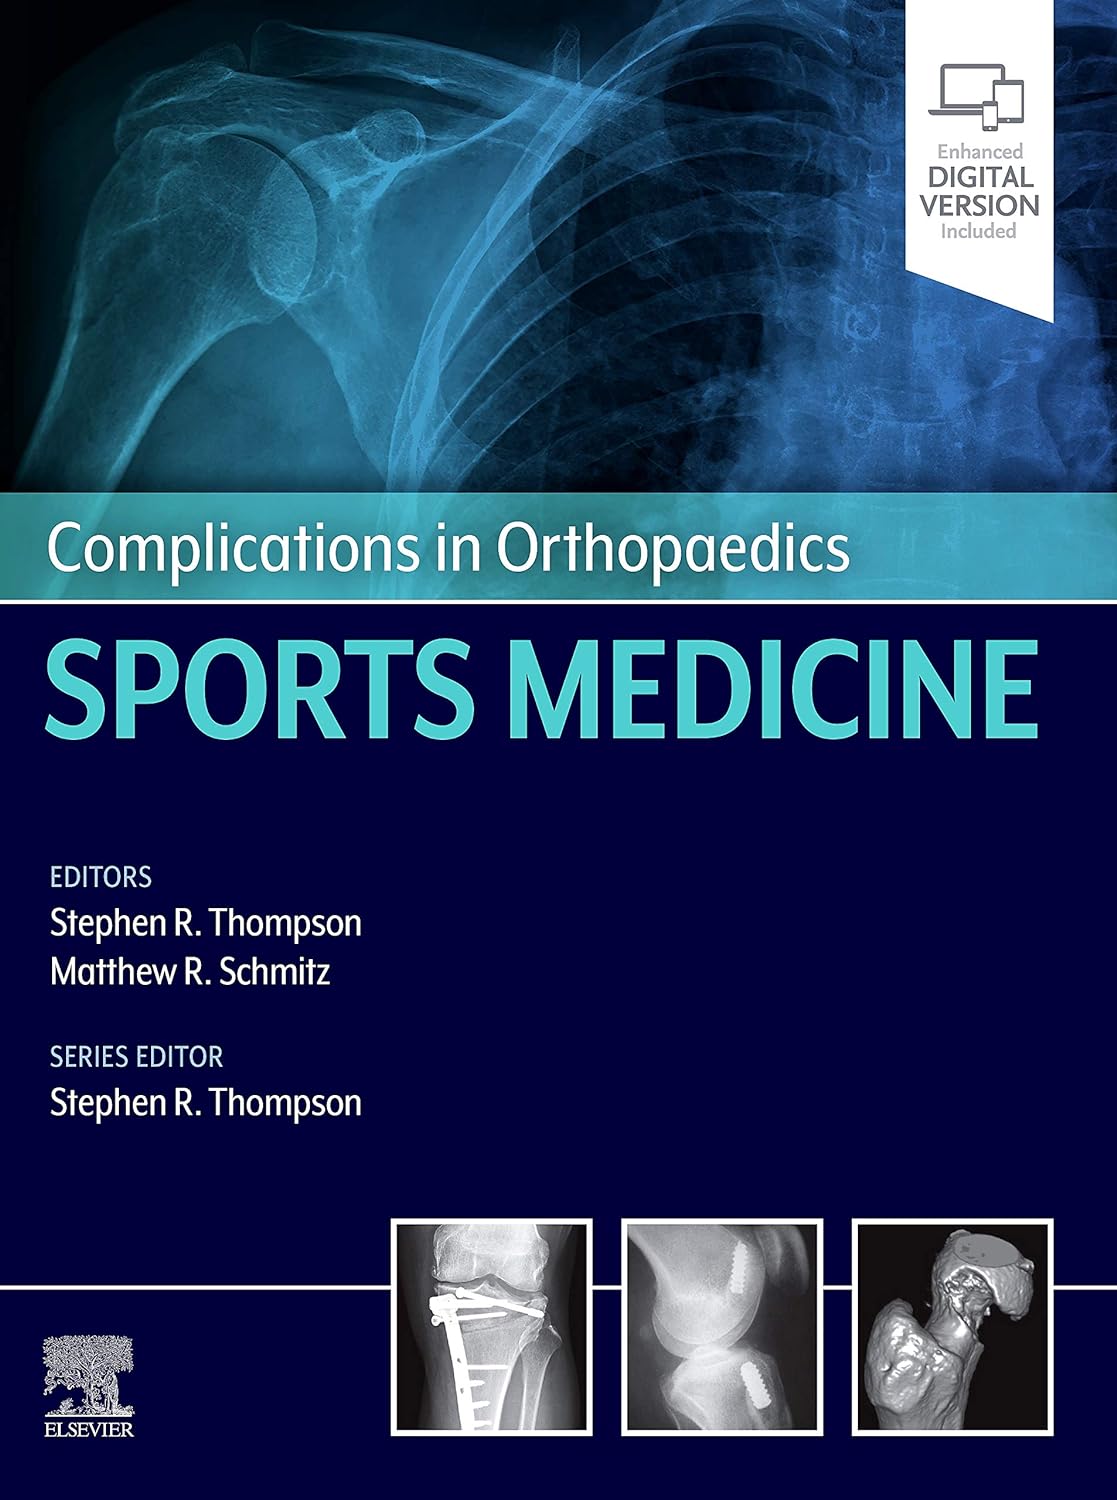 Complications in Orthopaedics: Sports Medicine  by  Stephen R. Thompson MD MEd FRCSC 